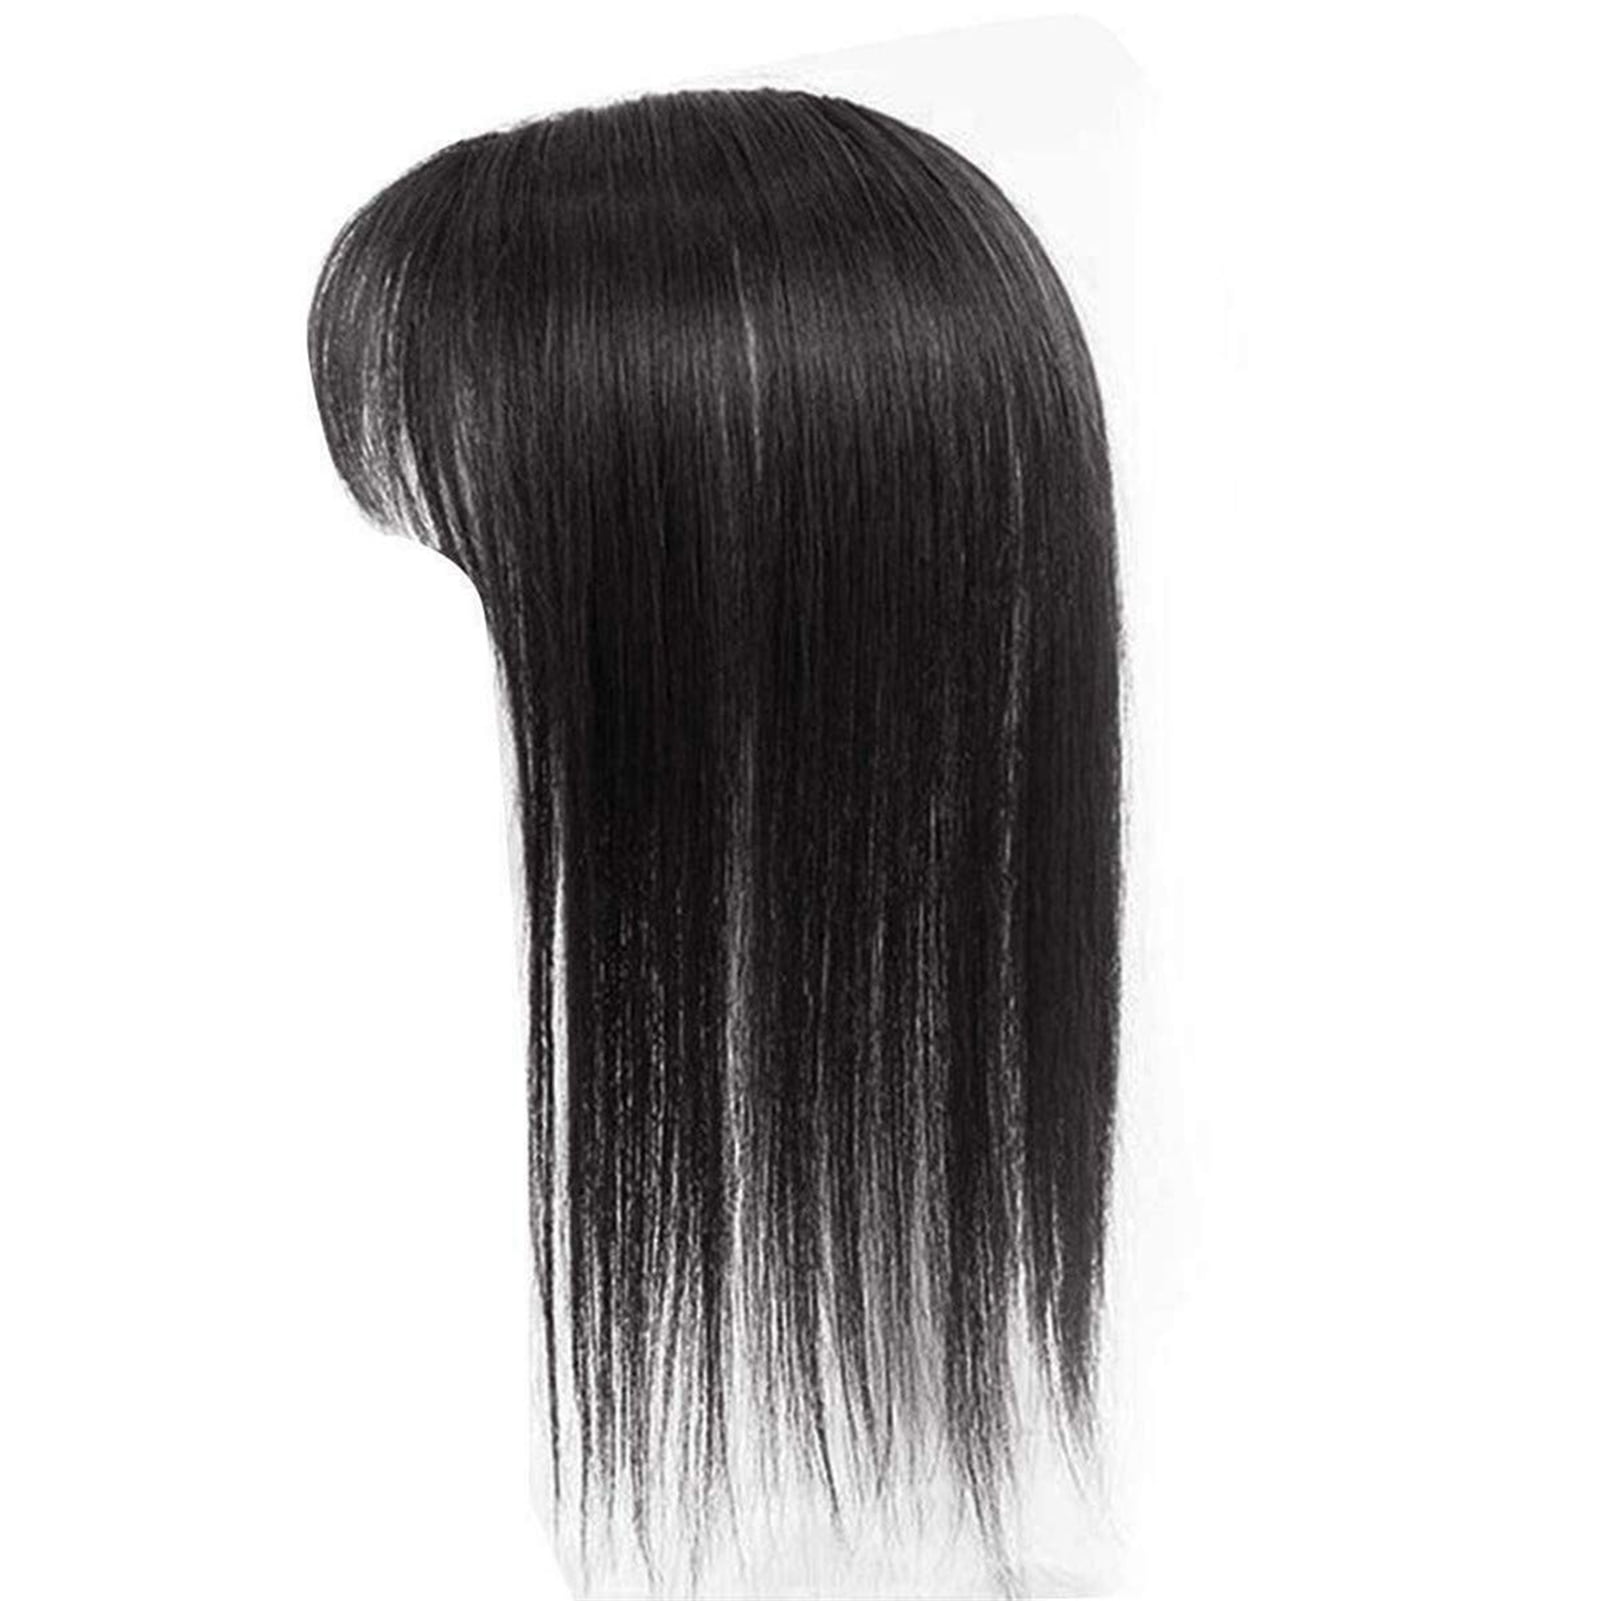 ALAN EATON Ombre Sensationnel Rainmaker Wig Long Straight Hair For Women In  Black, Dark Brown, And Cosplay Heat Resistant With Bangs From Tobiaserad,  $21.86 | DHgate.Com